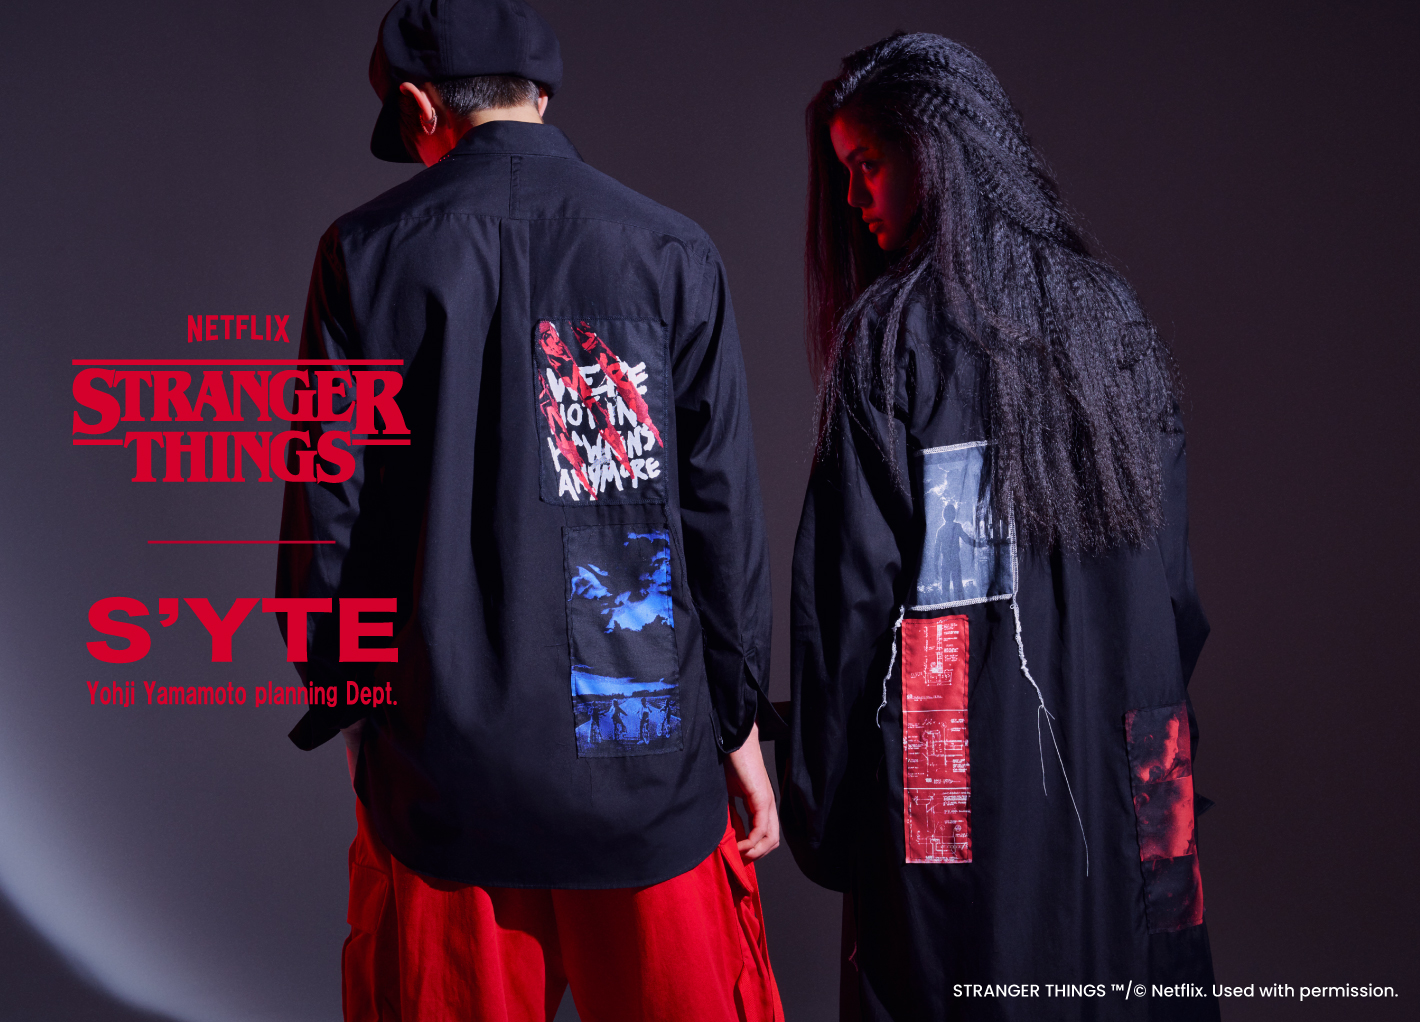 Stranger Things' Collection from S'YTE by Yohji Yamamoto Inc. Adds